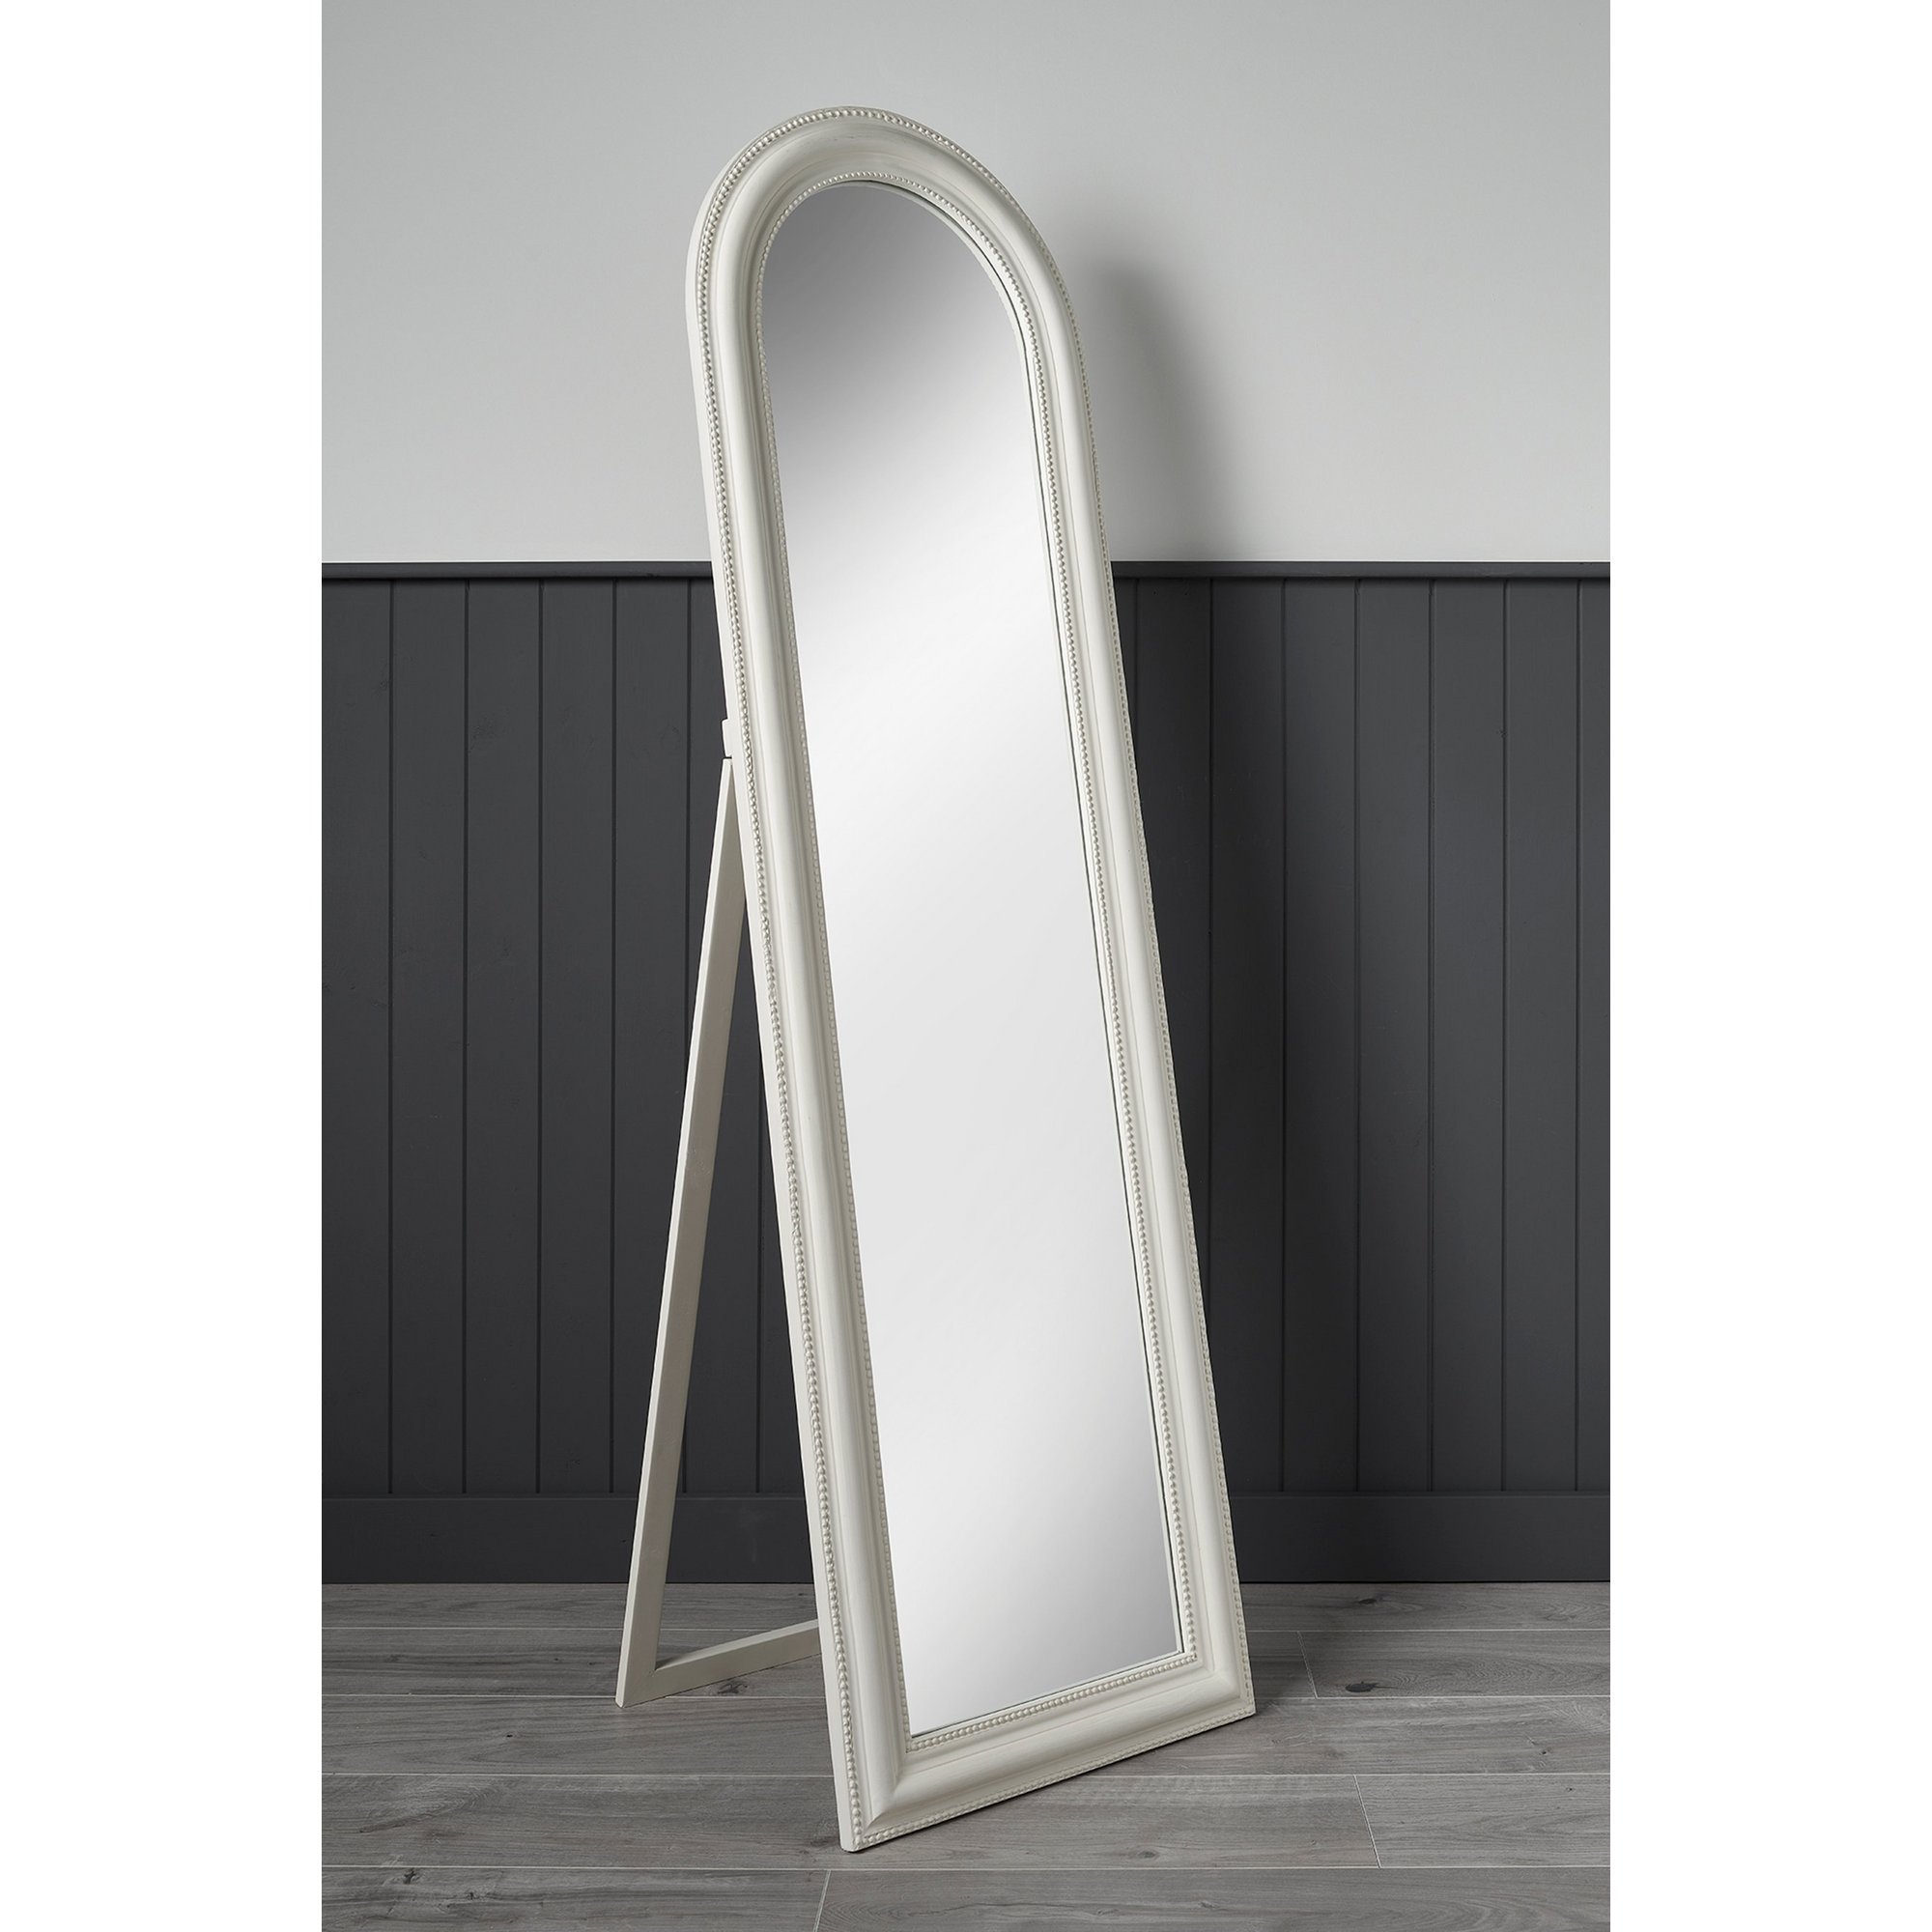 Large Full Length Free Standing Arched Wooden Mirror